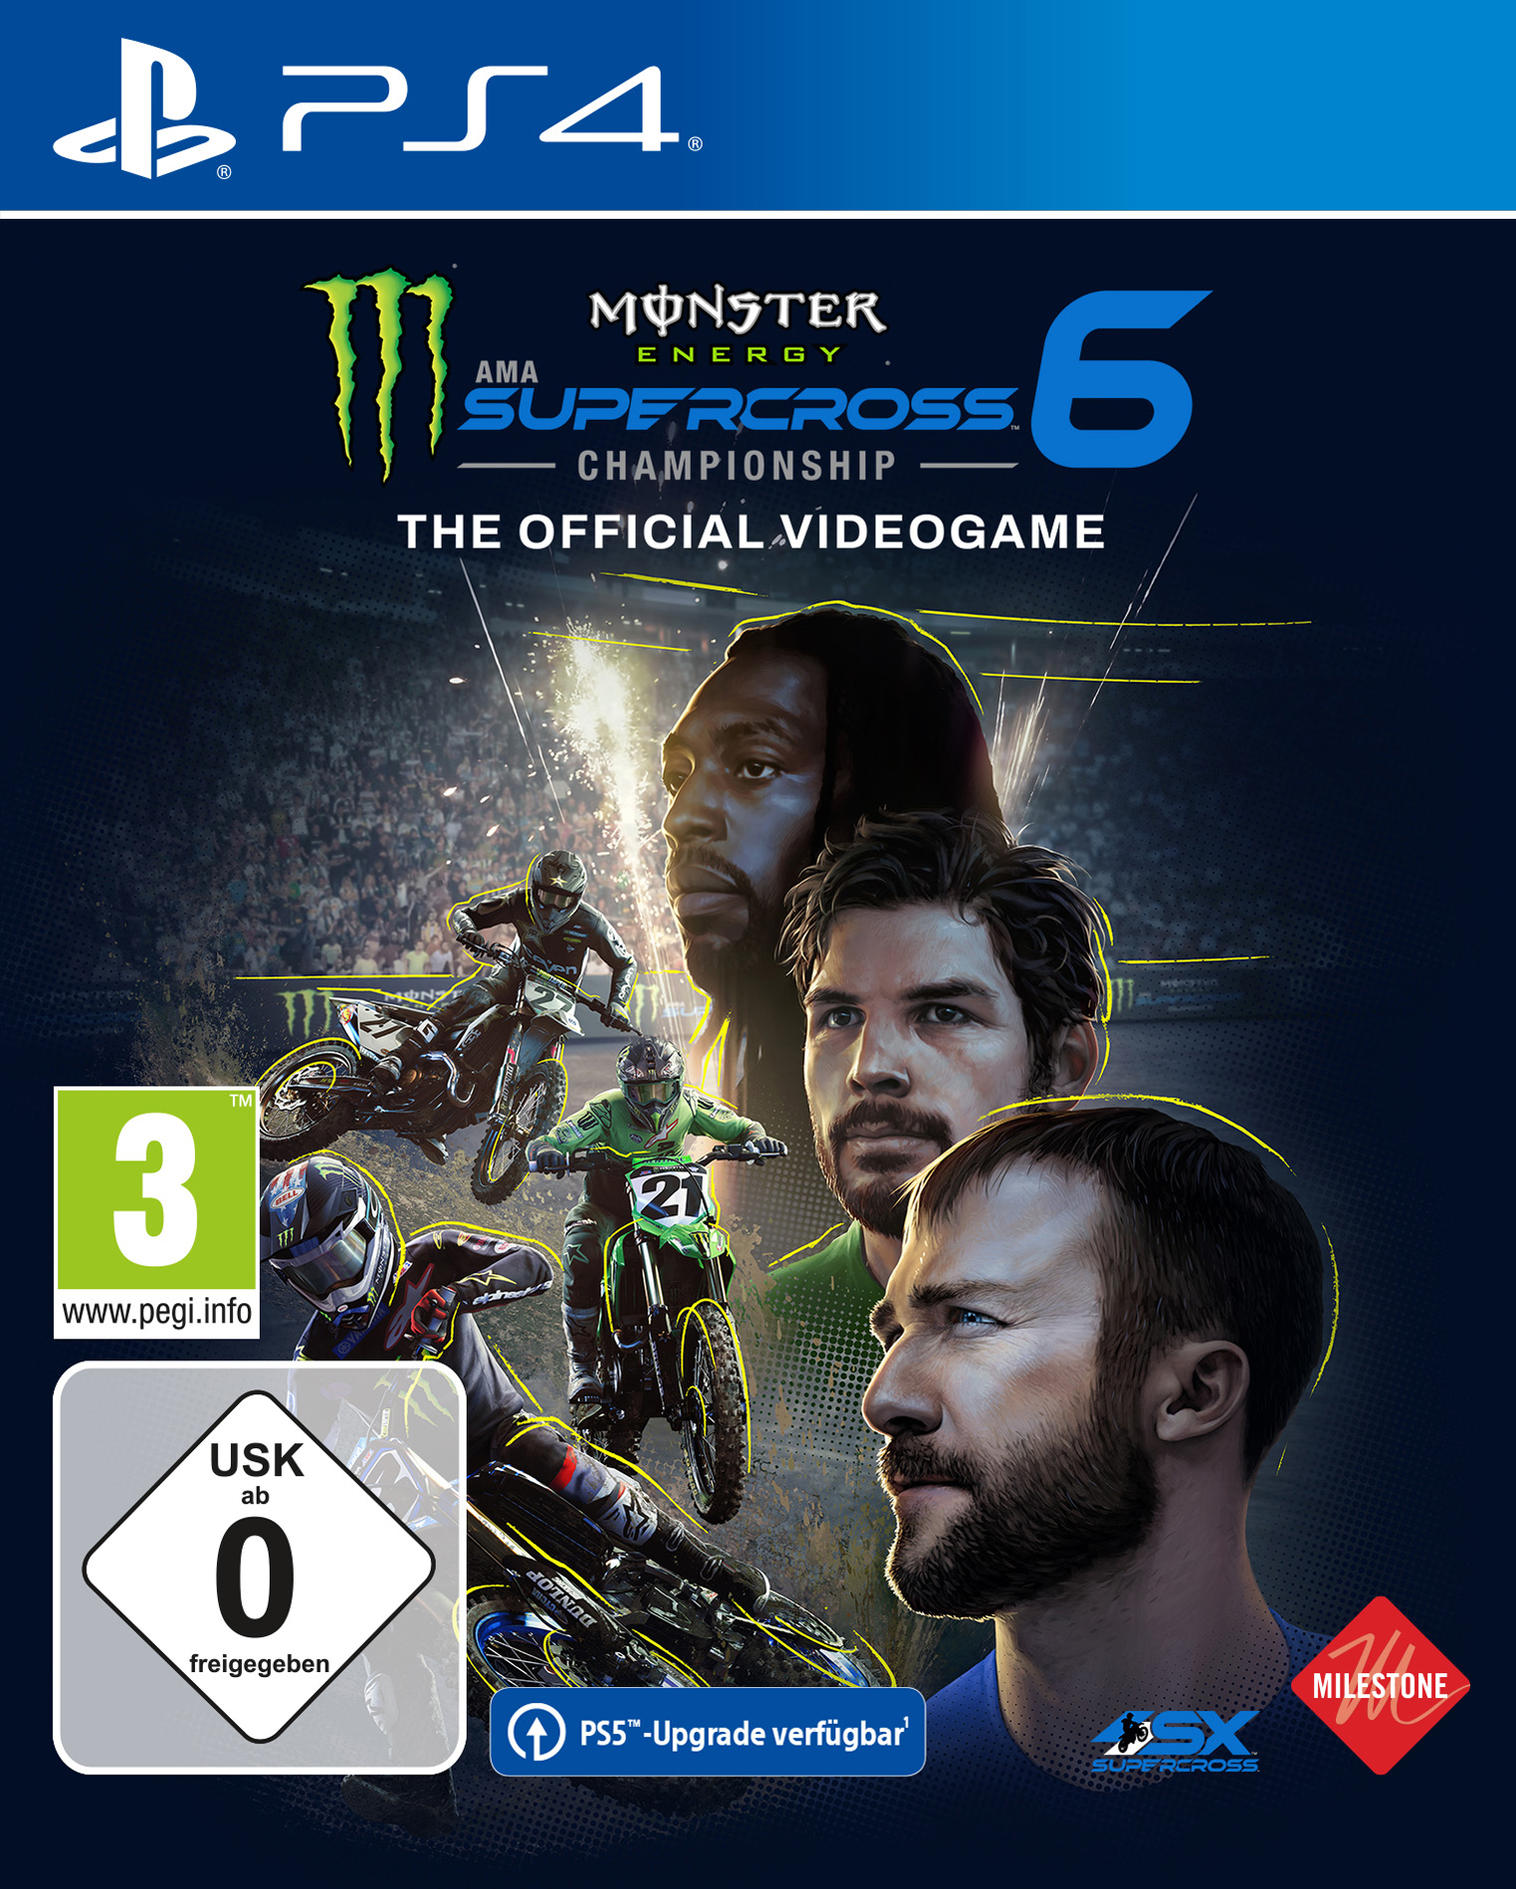 The 6 4] Energy - [PlayStation Official Videogame Monster Supercross -